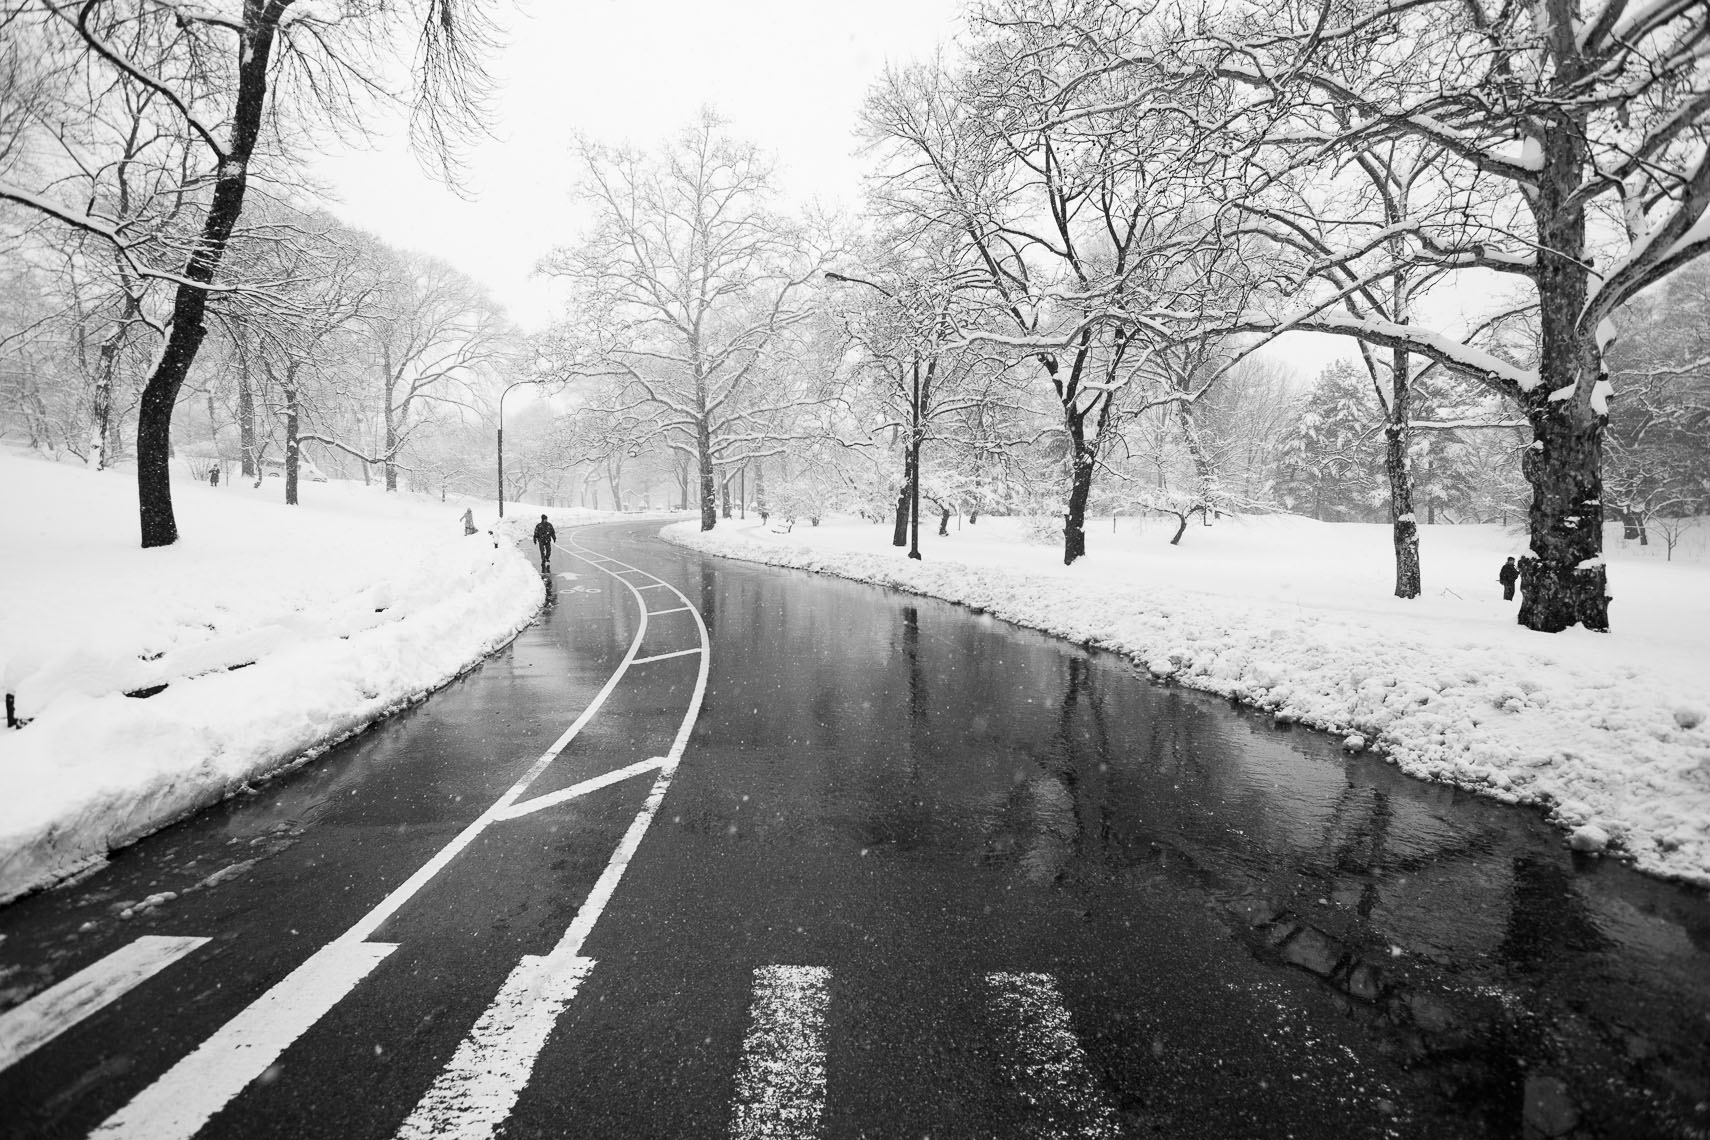 Winter, Central Park, NYC